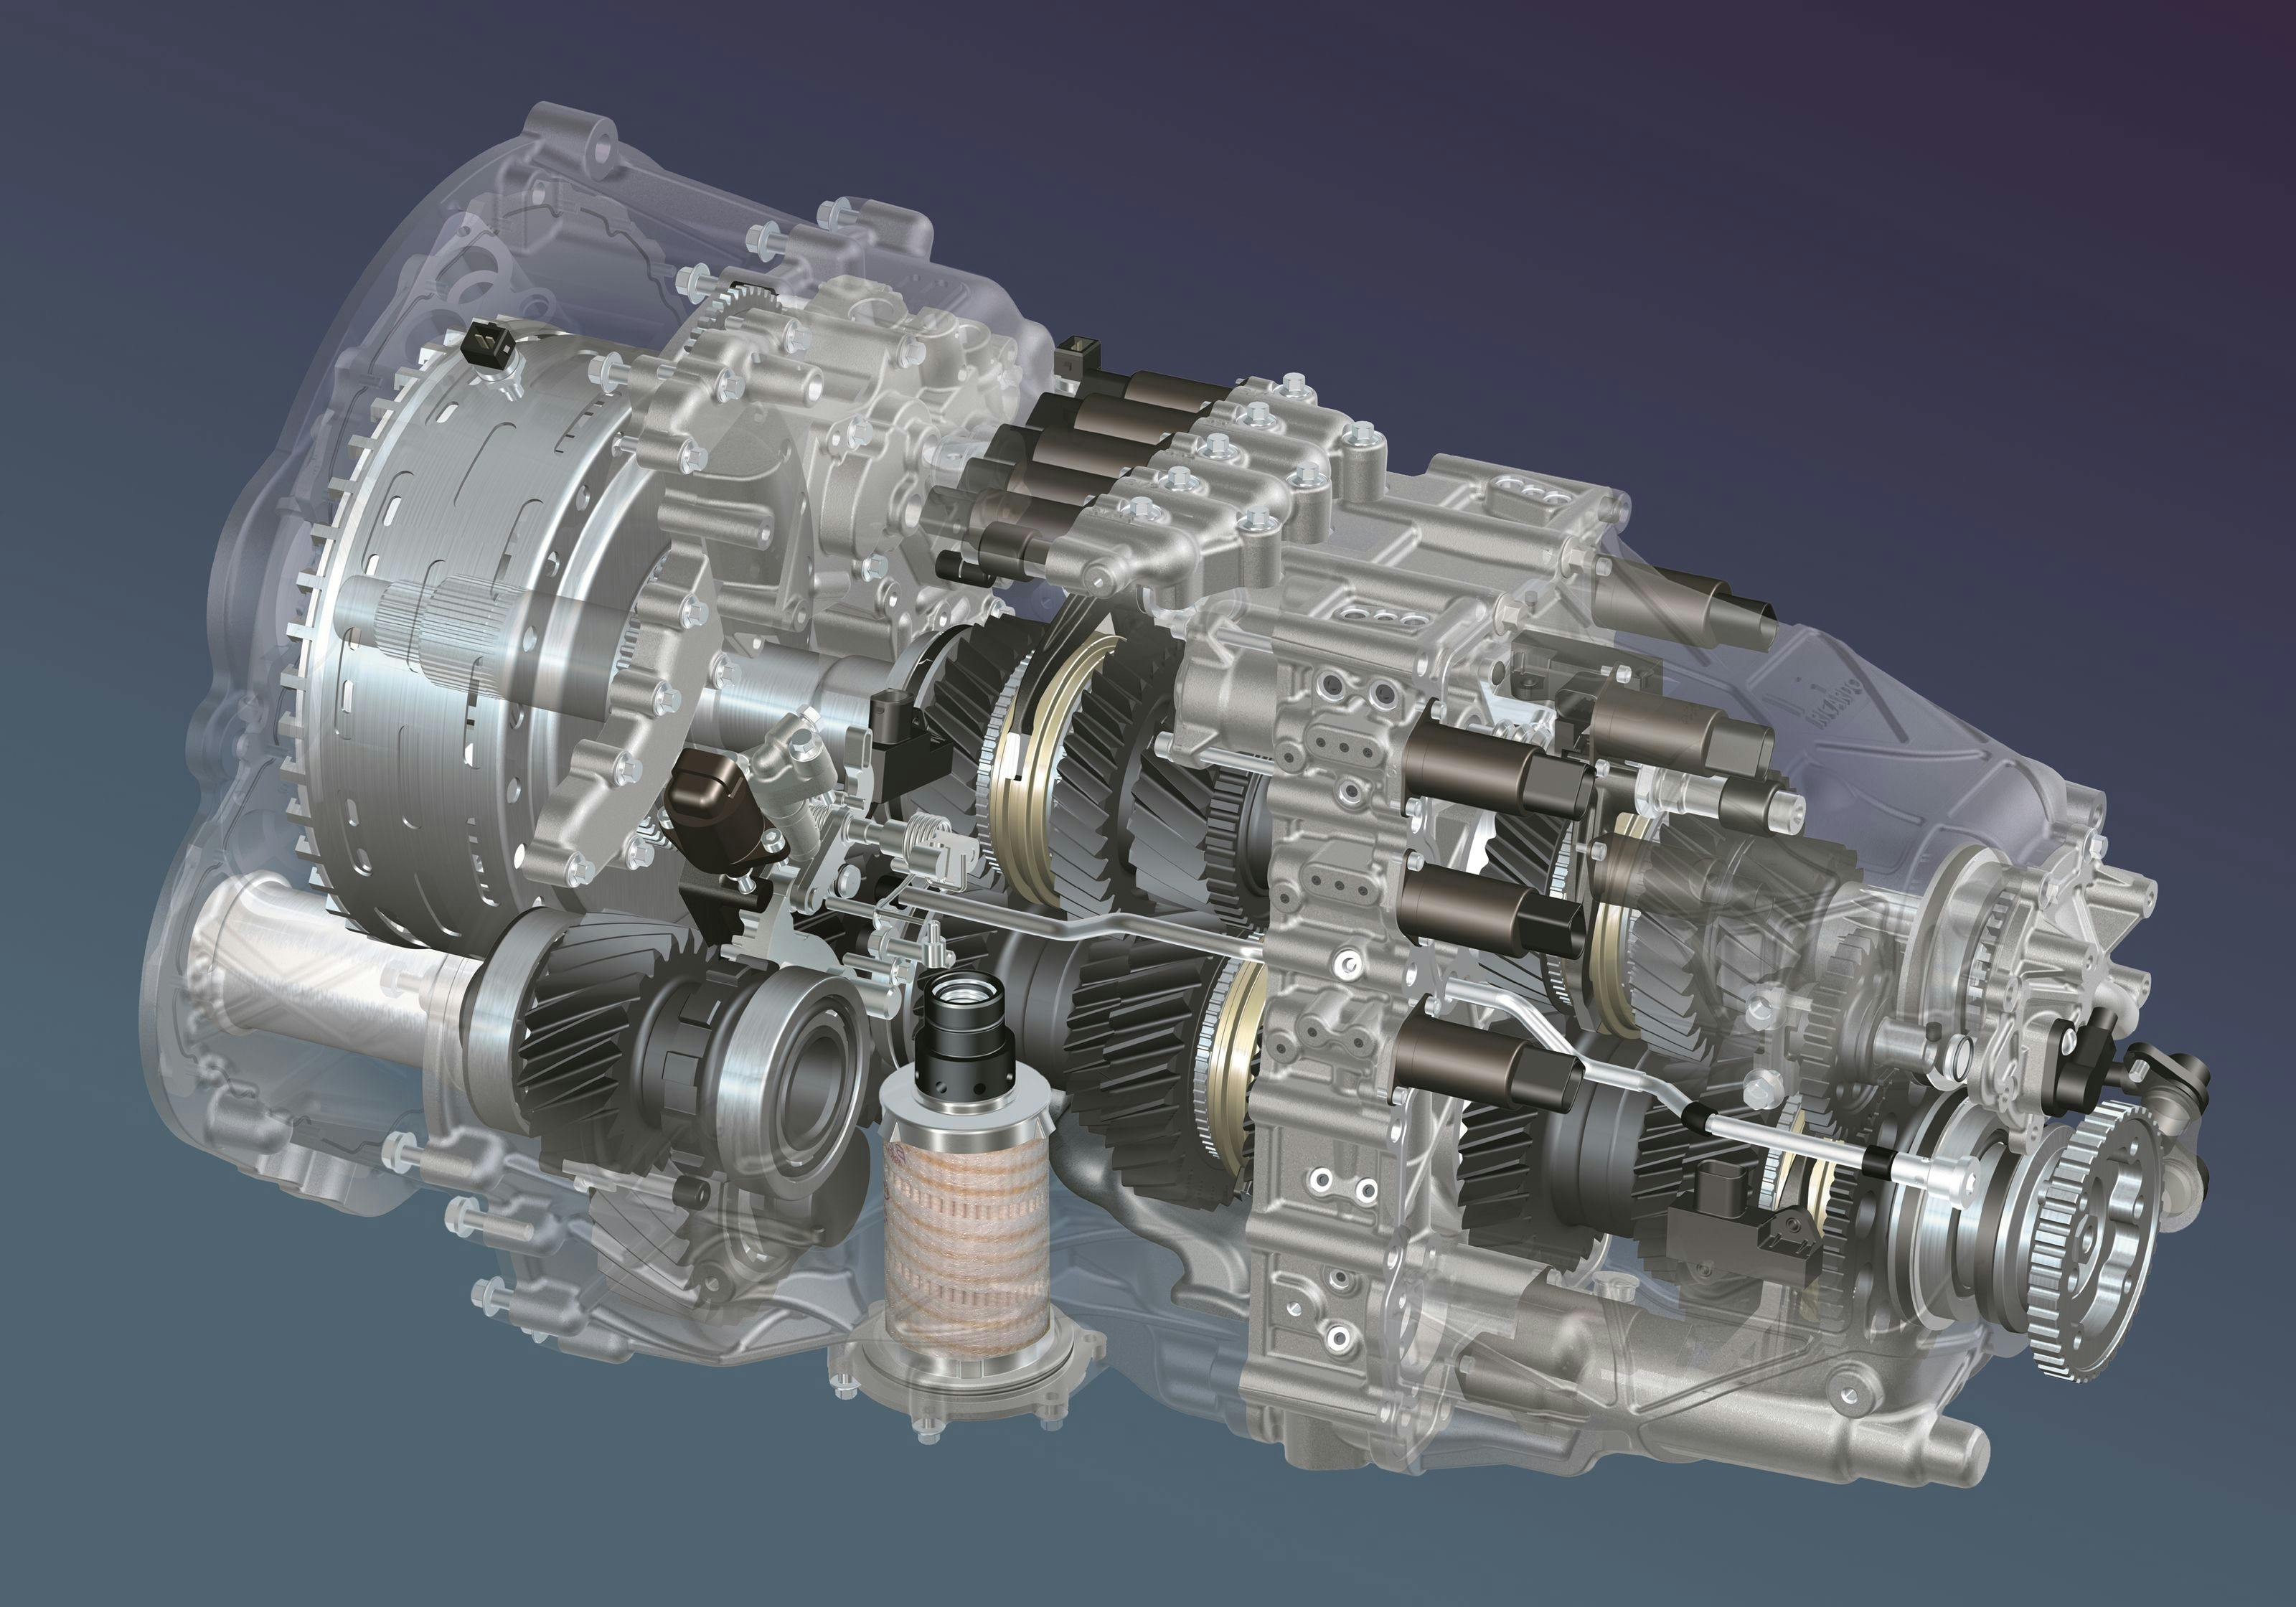 The world's first twin-clutch gearbox with seven speeds